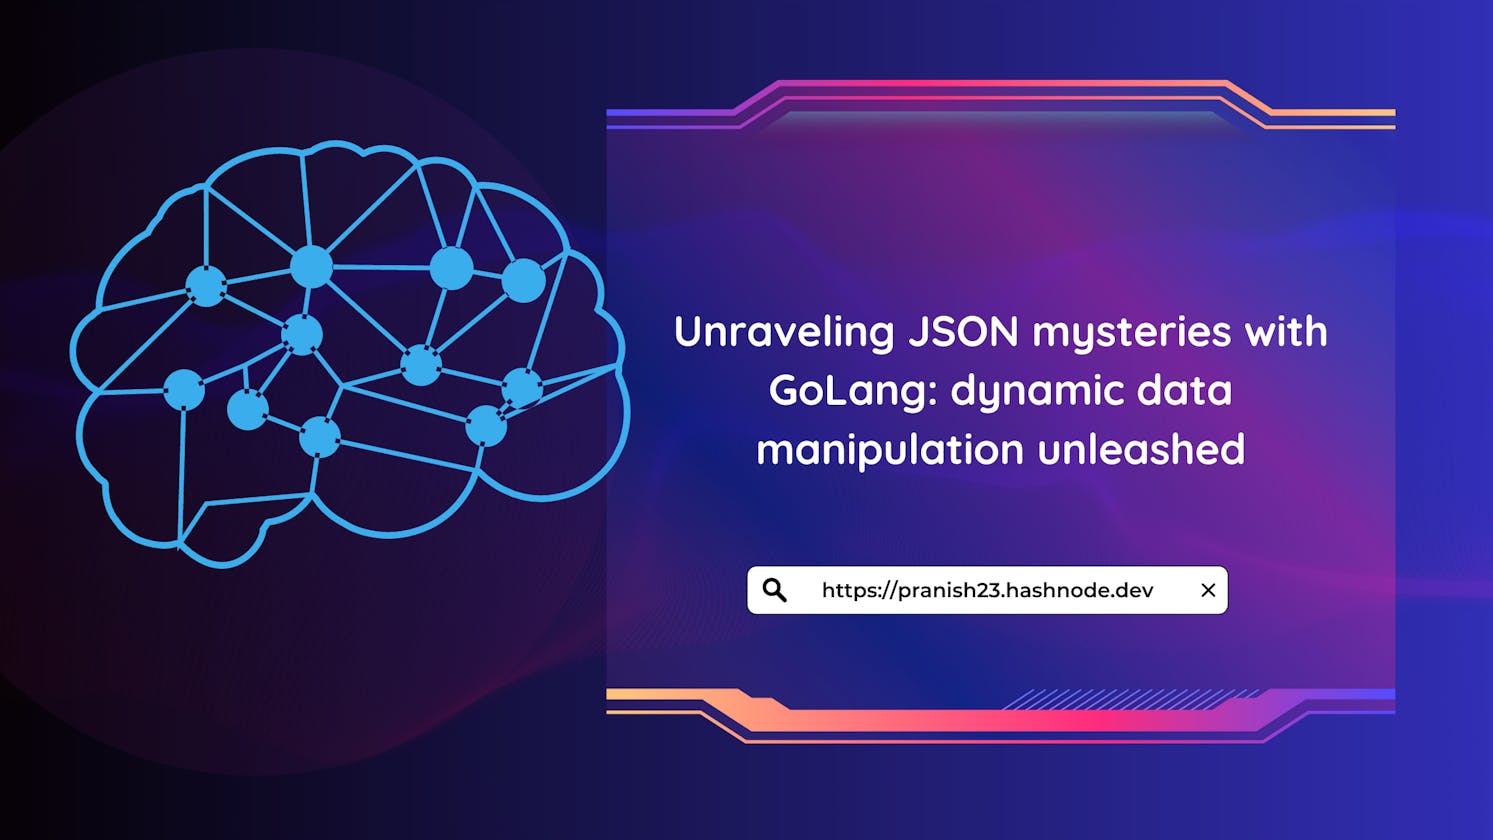 Unraveling JSON mysteries with GoLang: dynamic data manipulation unleashed!